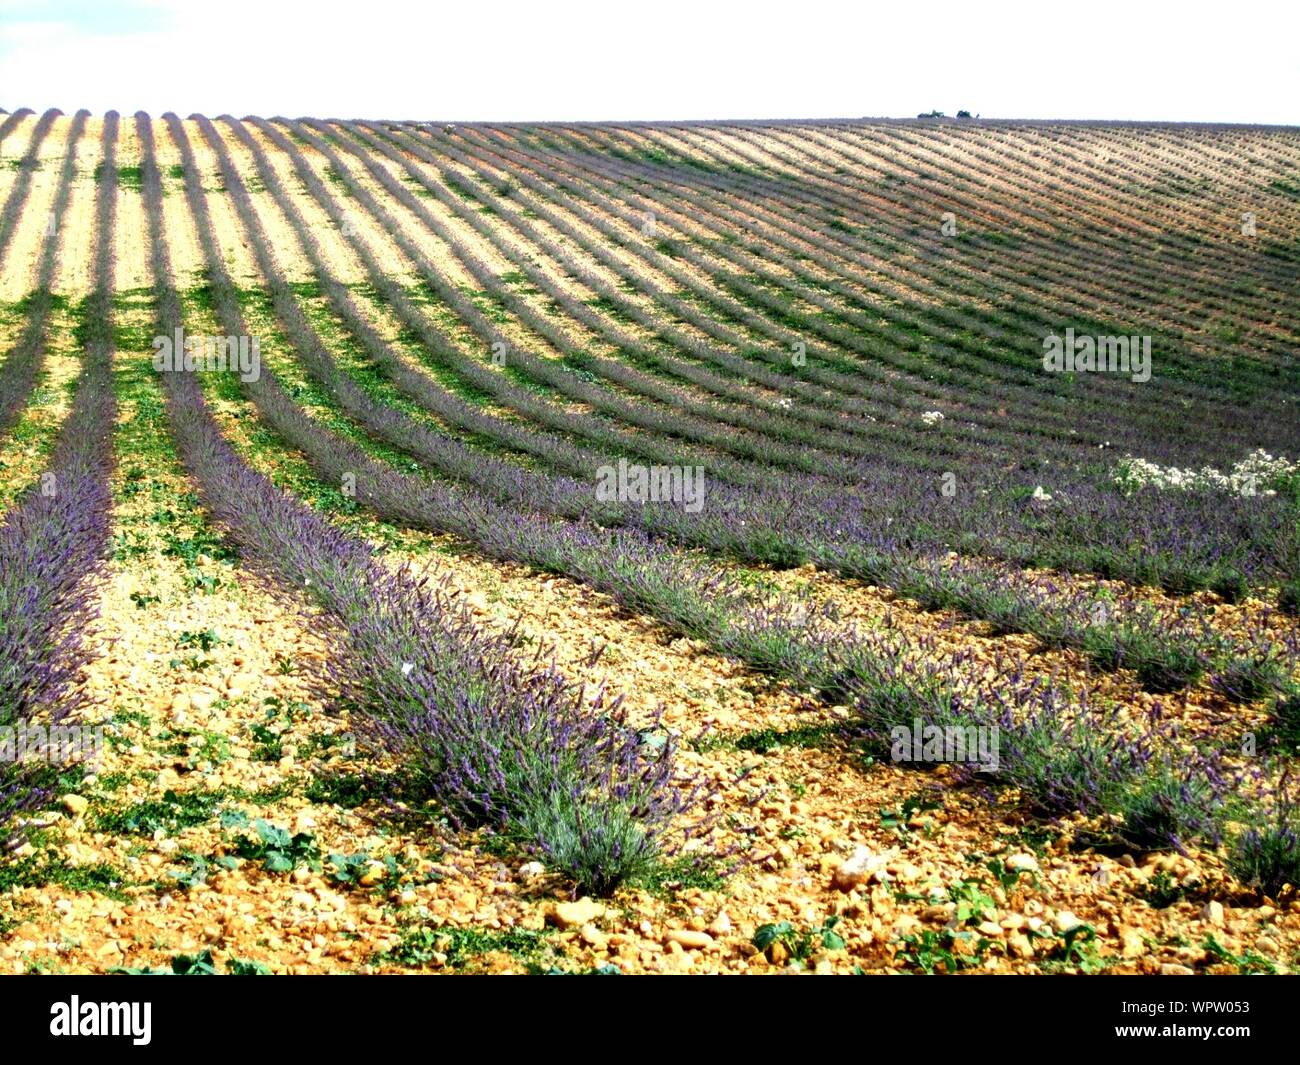 Rows Of Lavender In Field Stock Photo